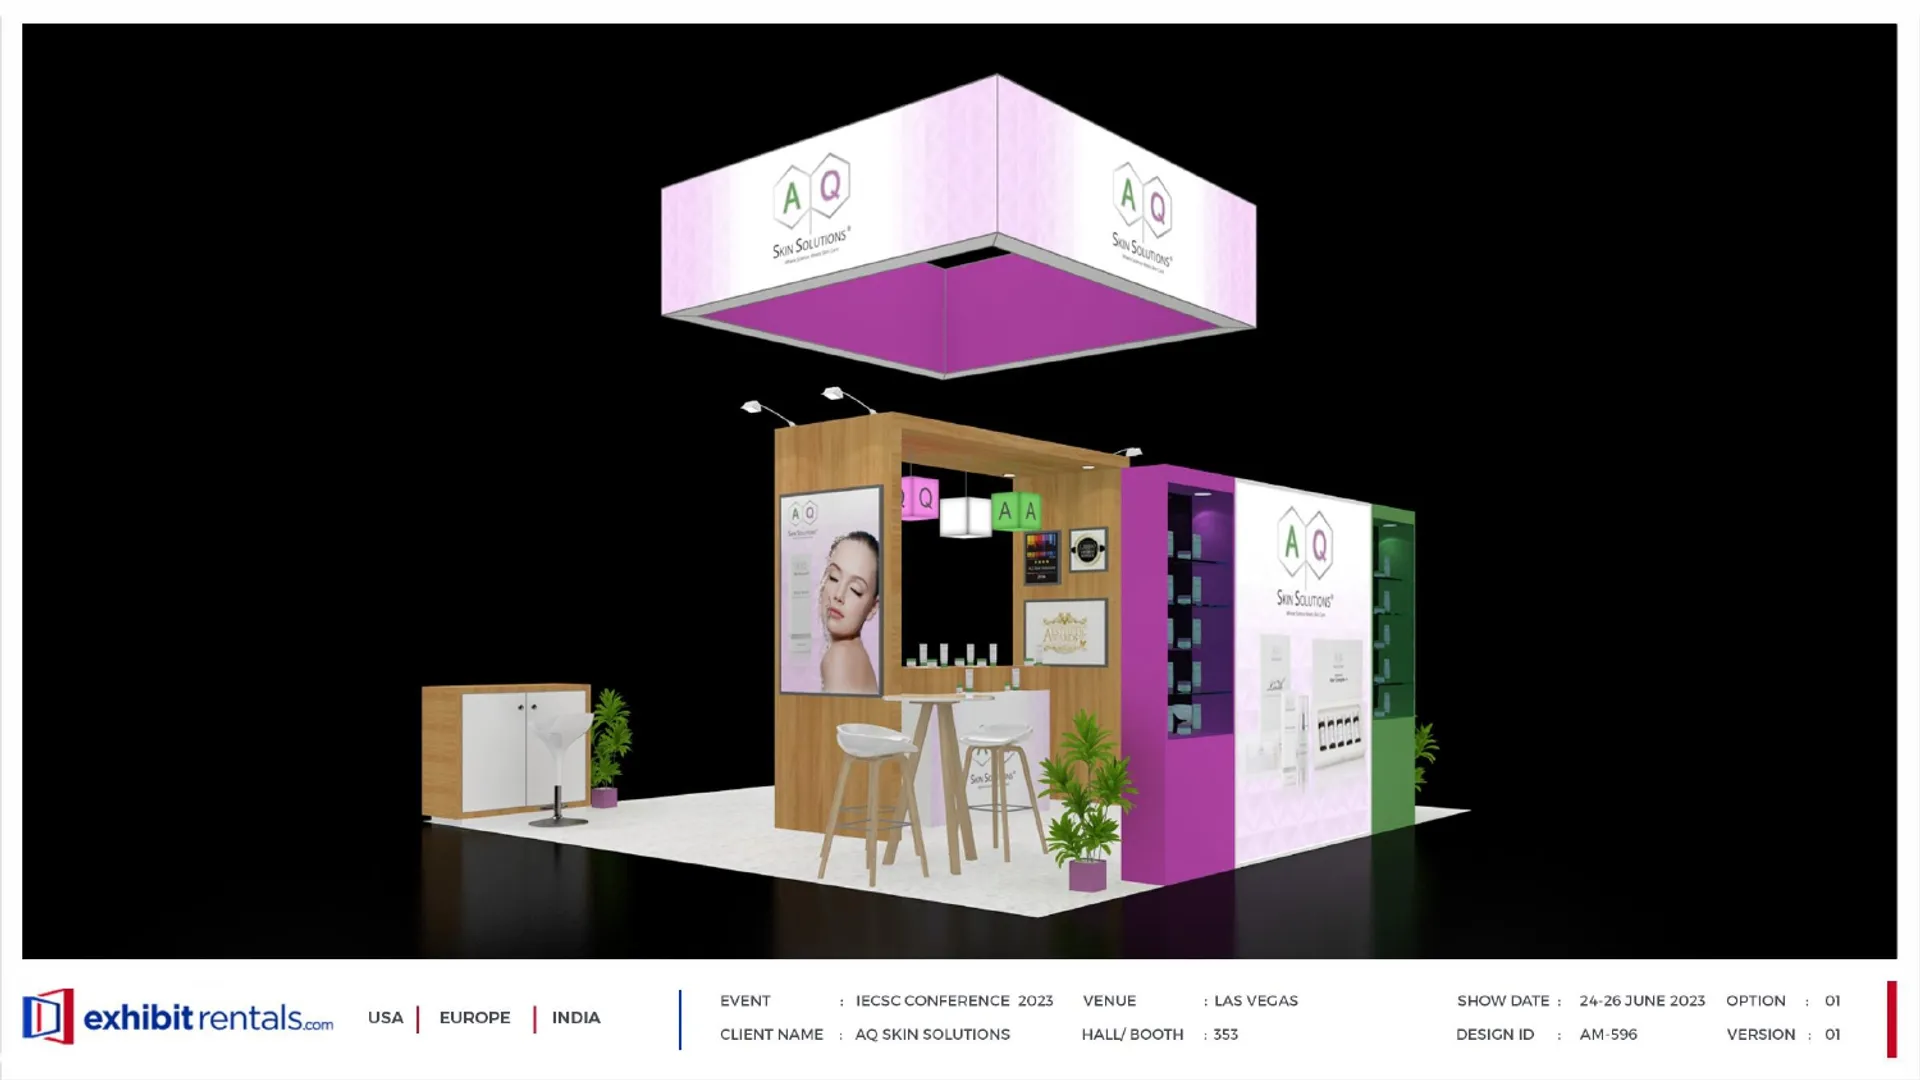 booth-design-projects/Exhibit-Rentals/2024-04-18-20x20-ISLAND-Project-85/1.1_AQ Skin Solutions_IECSC Conference_ER design proposal -19_page-0001-7dpjpi.jpg